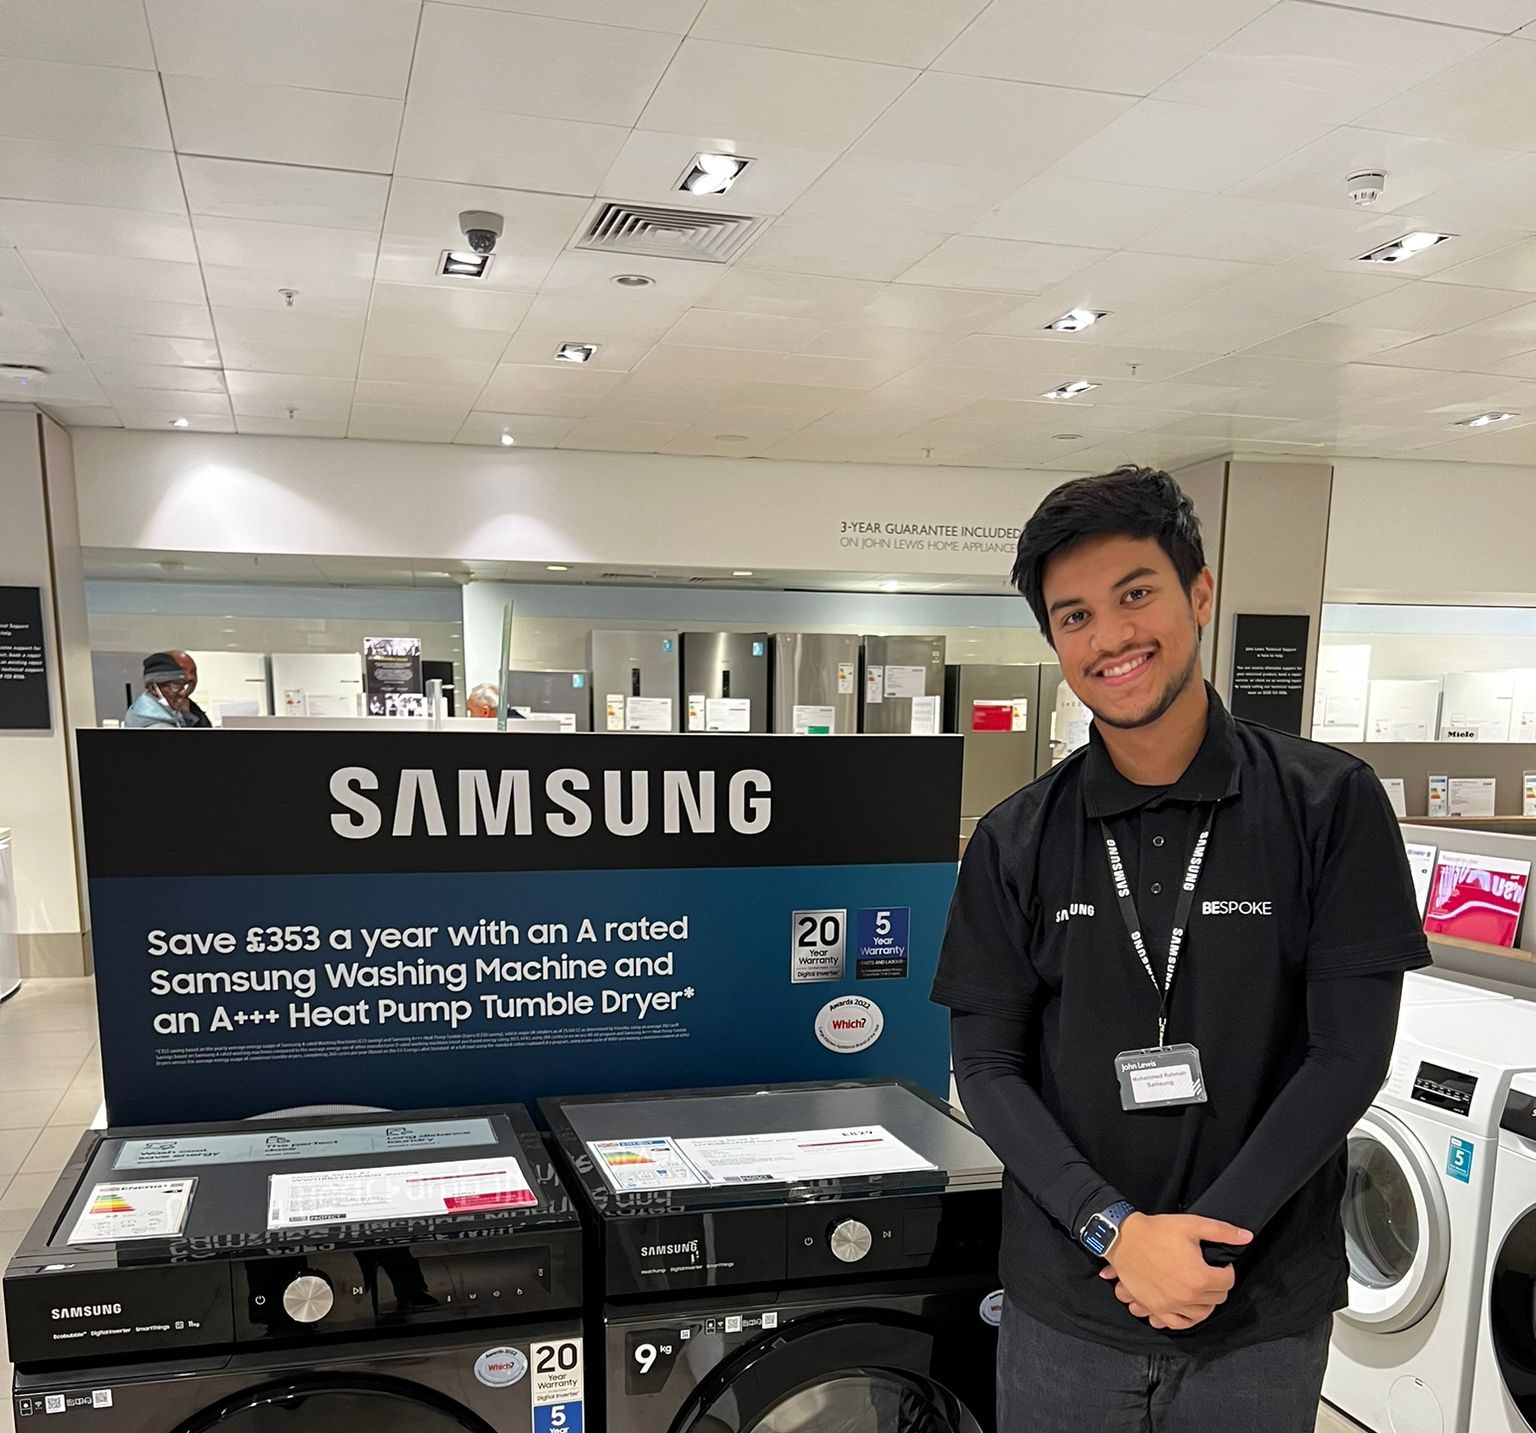 man standing in front of Samsung appliance in store